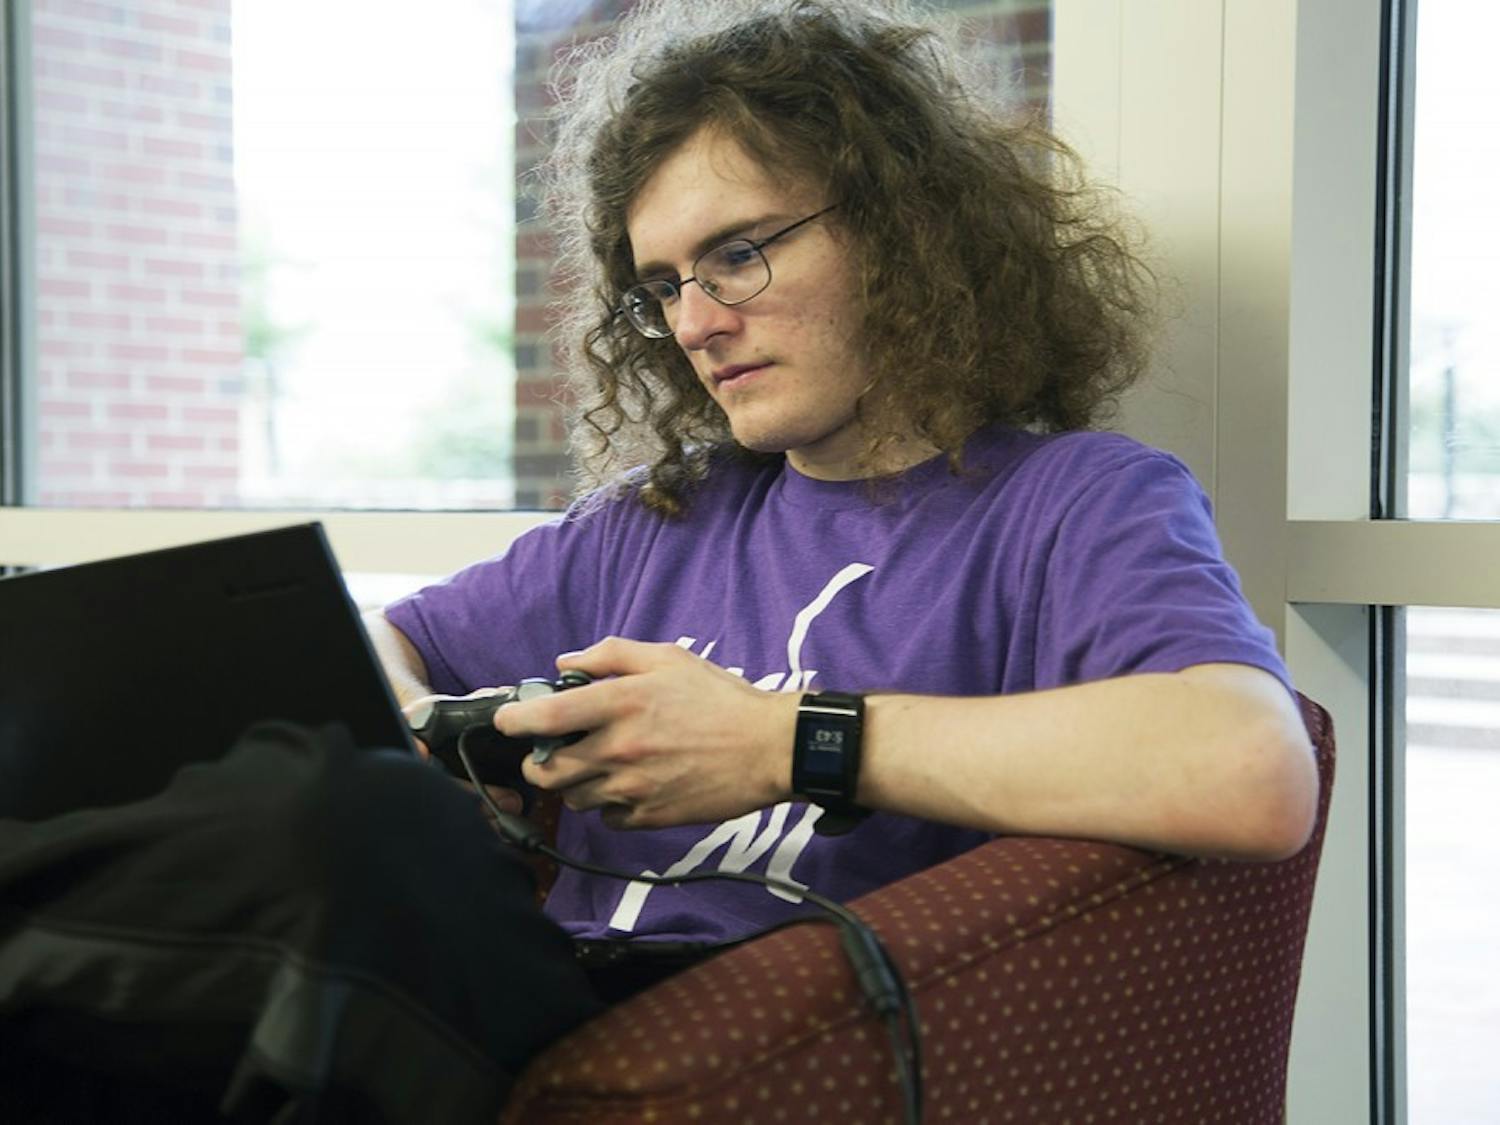 Game JamJacob Settlemyre is a Carolina student majoring in Computer Science. His professor recommended him to a Game Jam in Washington.D.C. He said "everything in the Game Jam was fun." He "wants to keep doing this project because it is fun." 